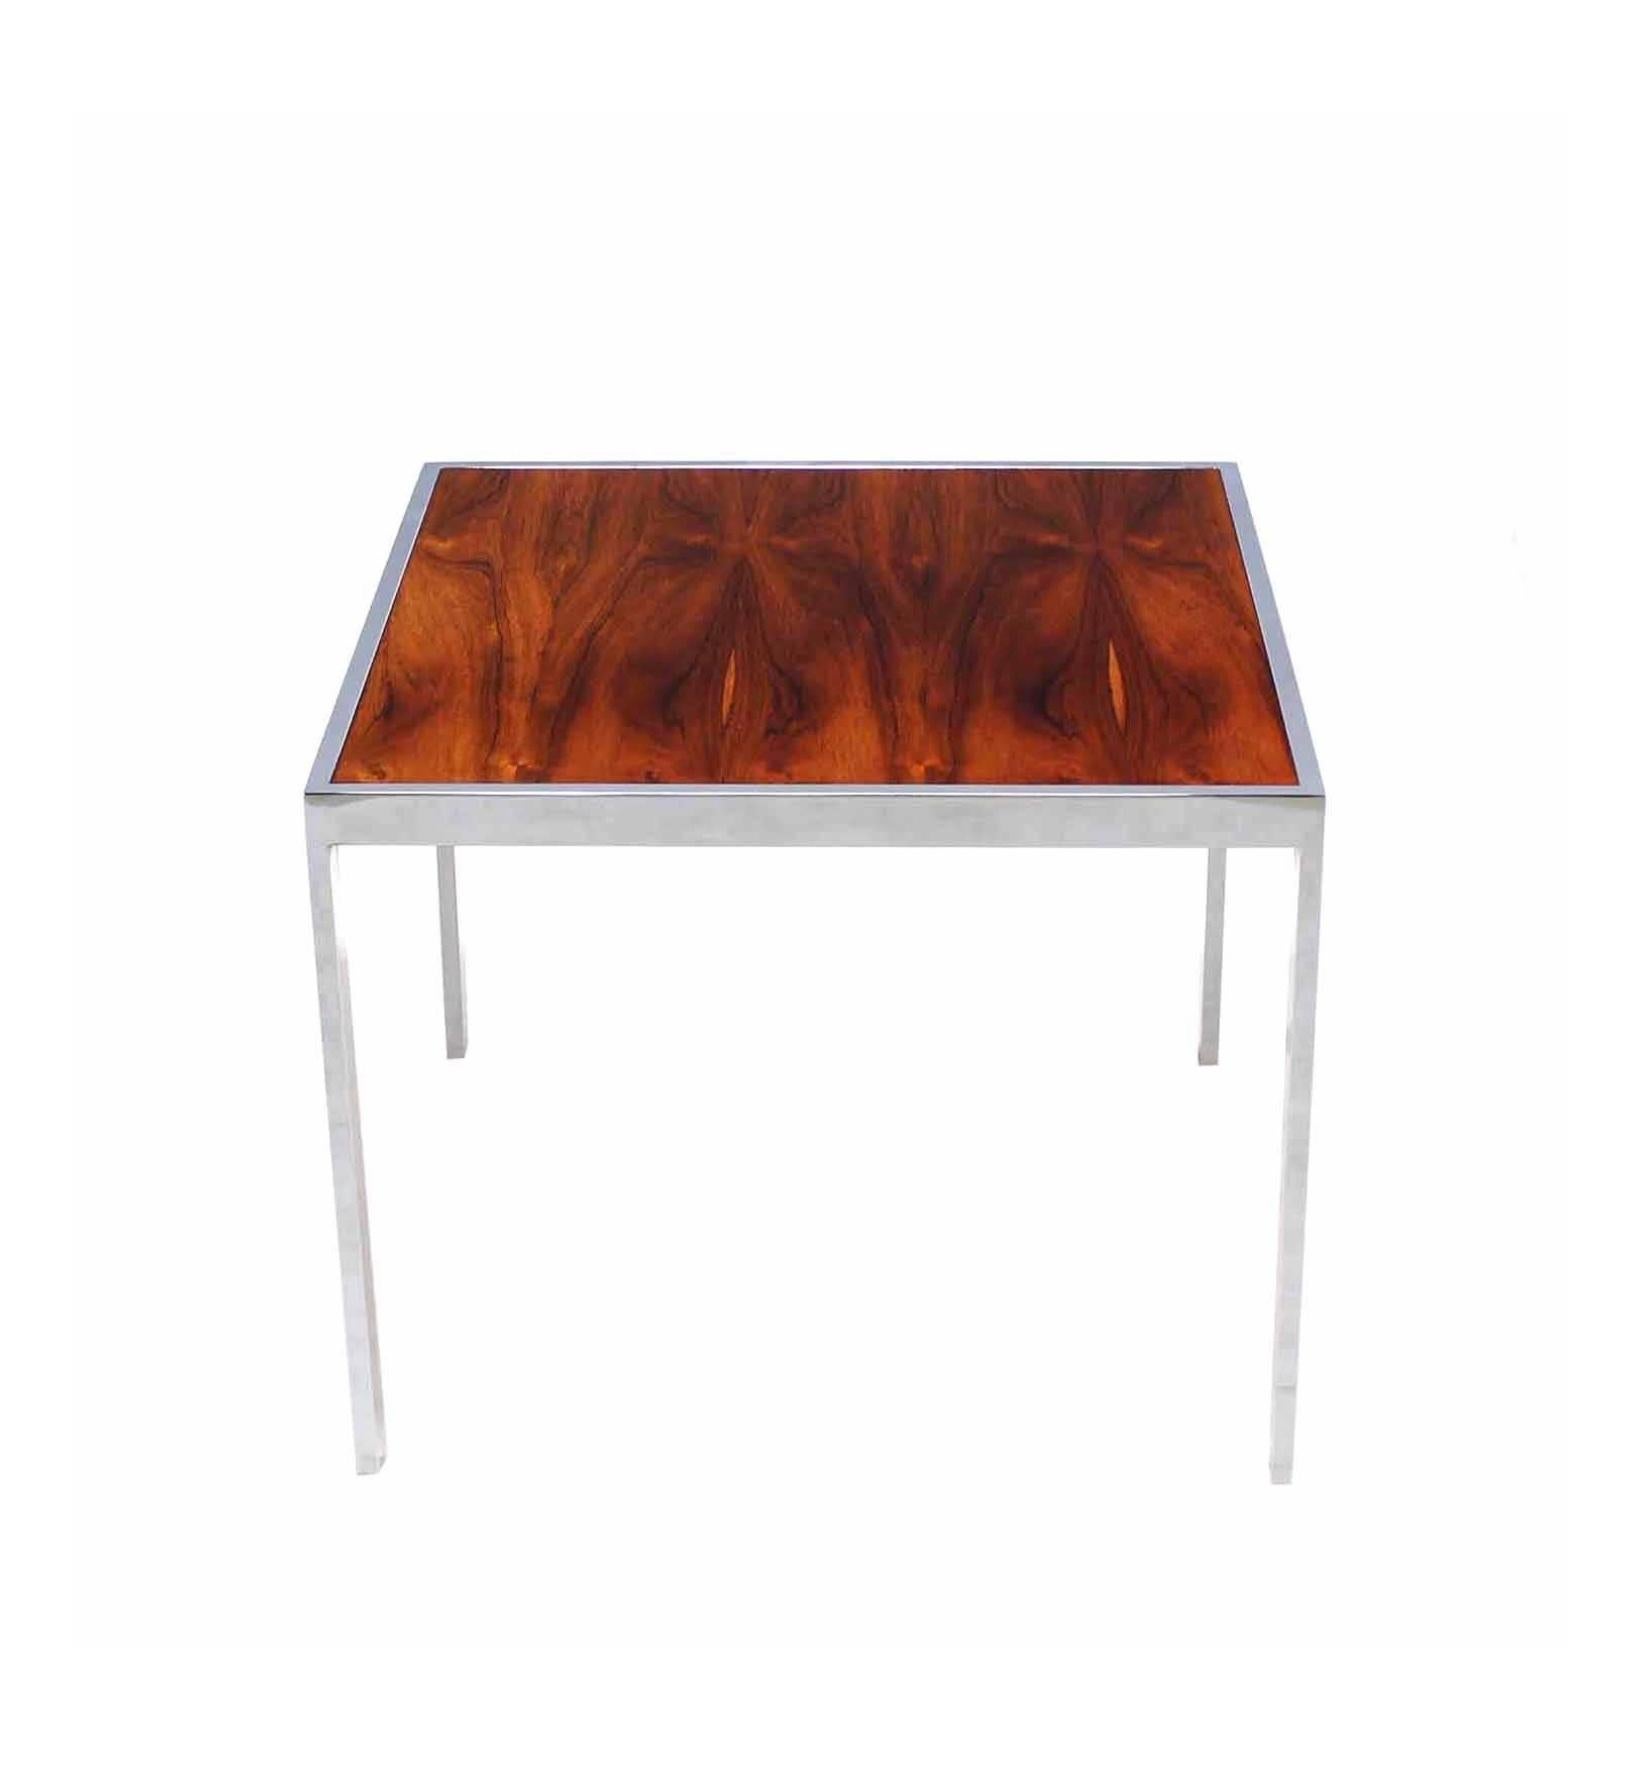 Nice Mid-Century Modern Baughman style chrome and rosewood side table. Measures: 26 x 26.